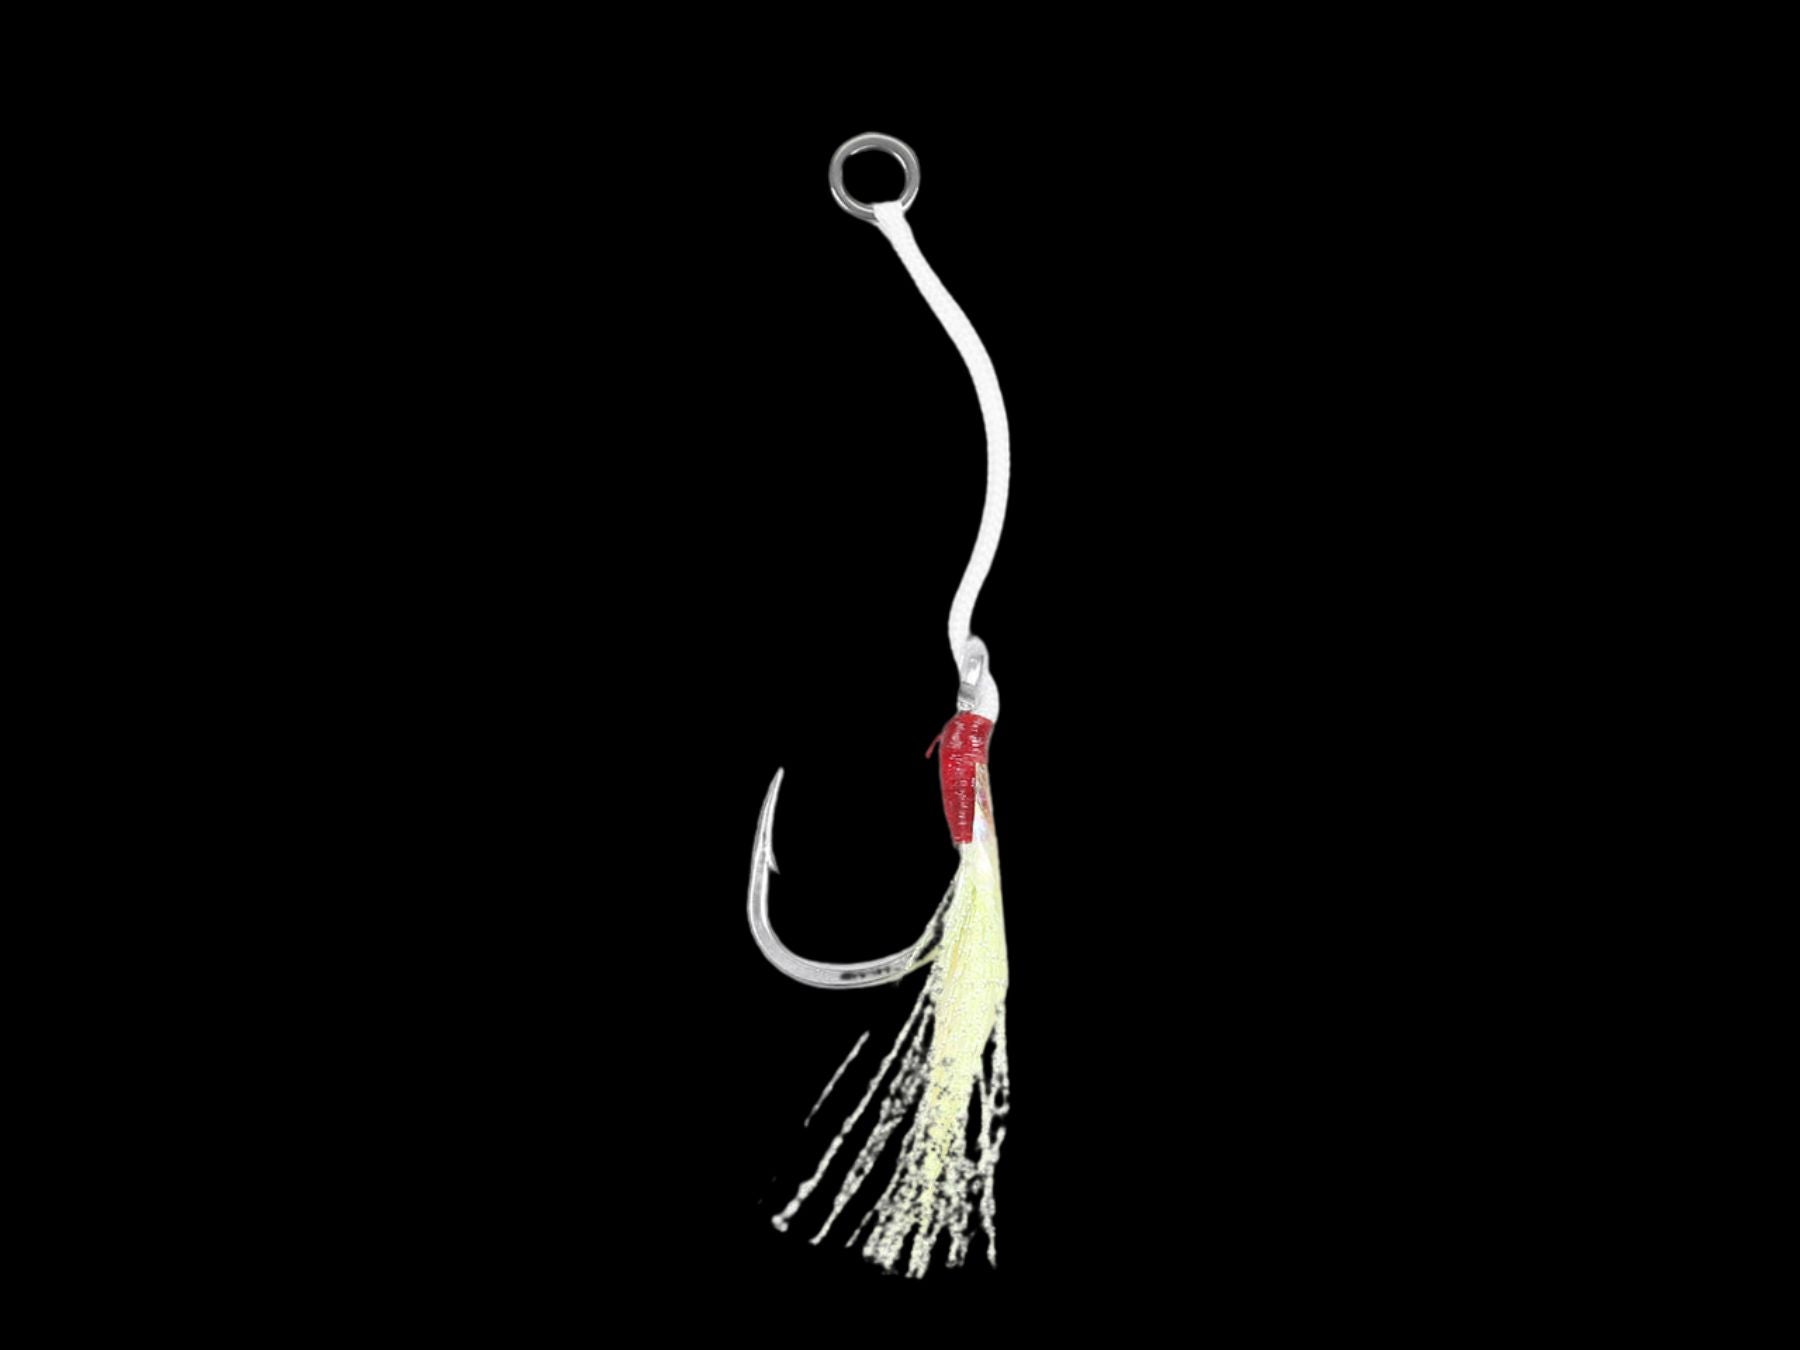 Jigging World Zblade Octopus Circle In-Line Hooks – Tackle World